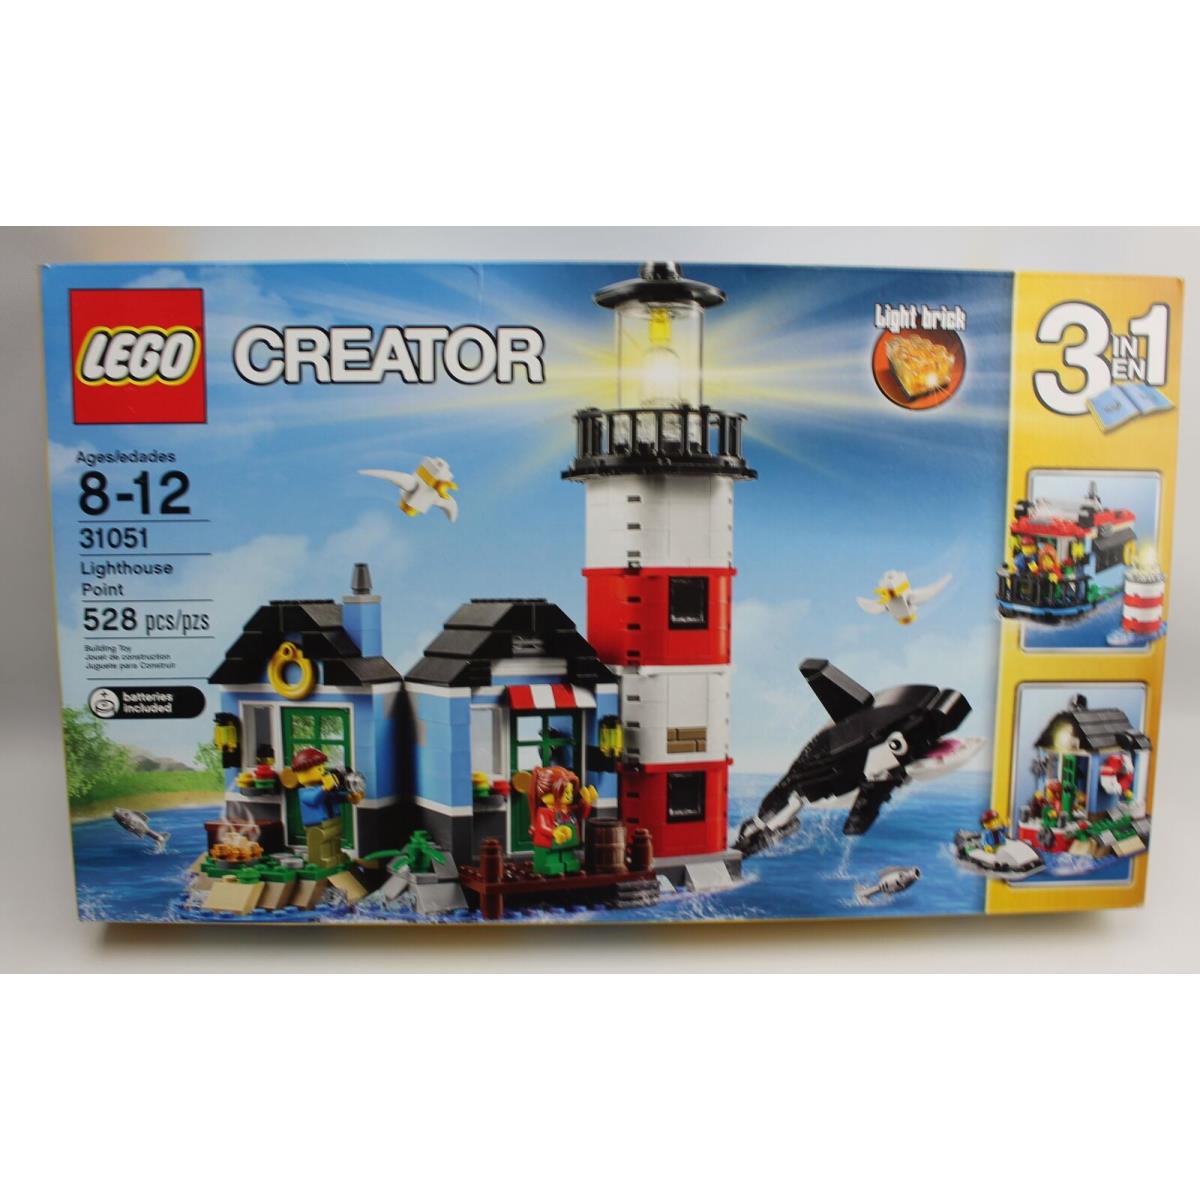 Lego Creator 3 in 1 Lighthouse Point Set 31051